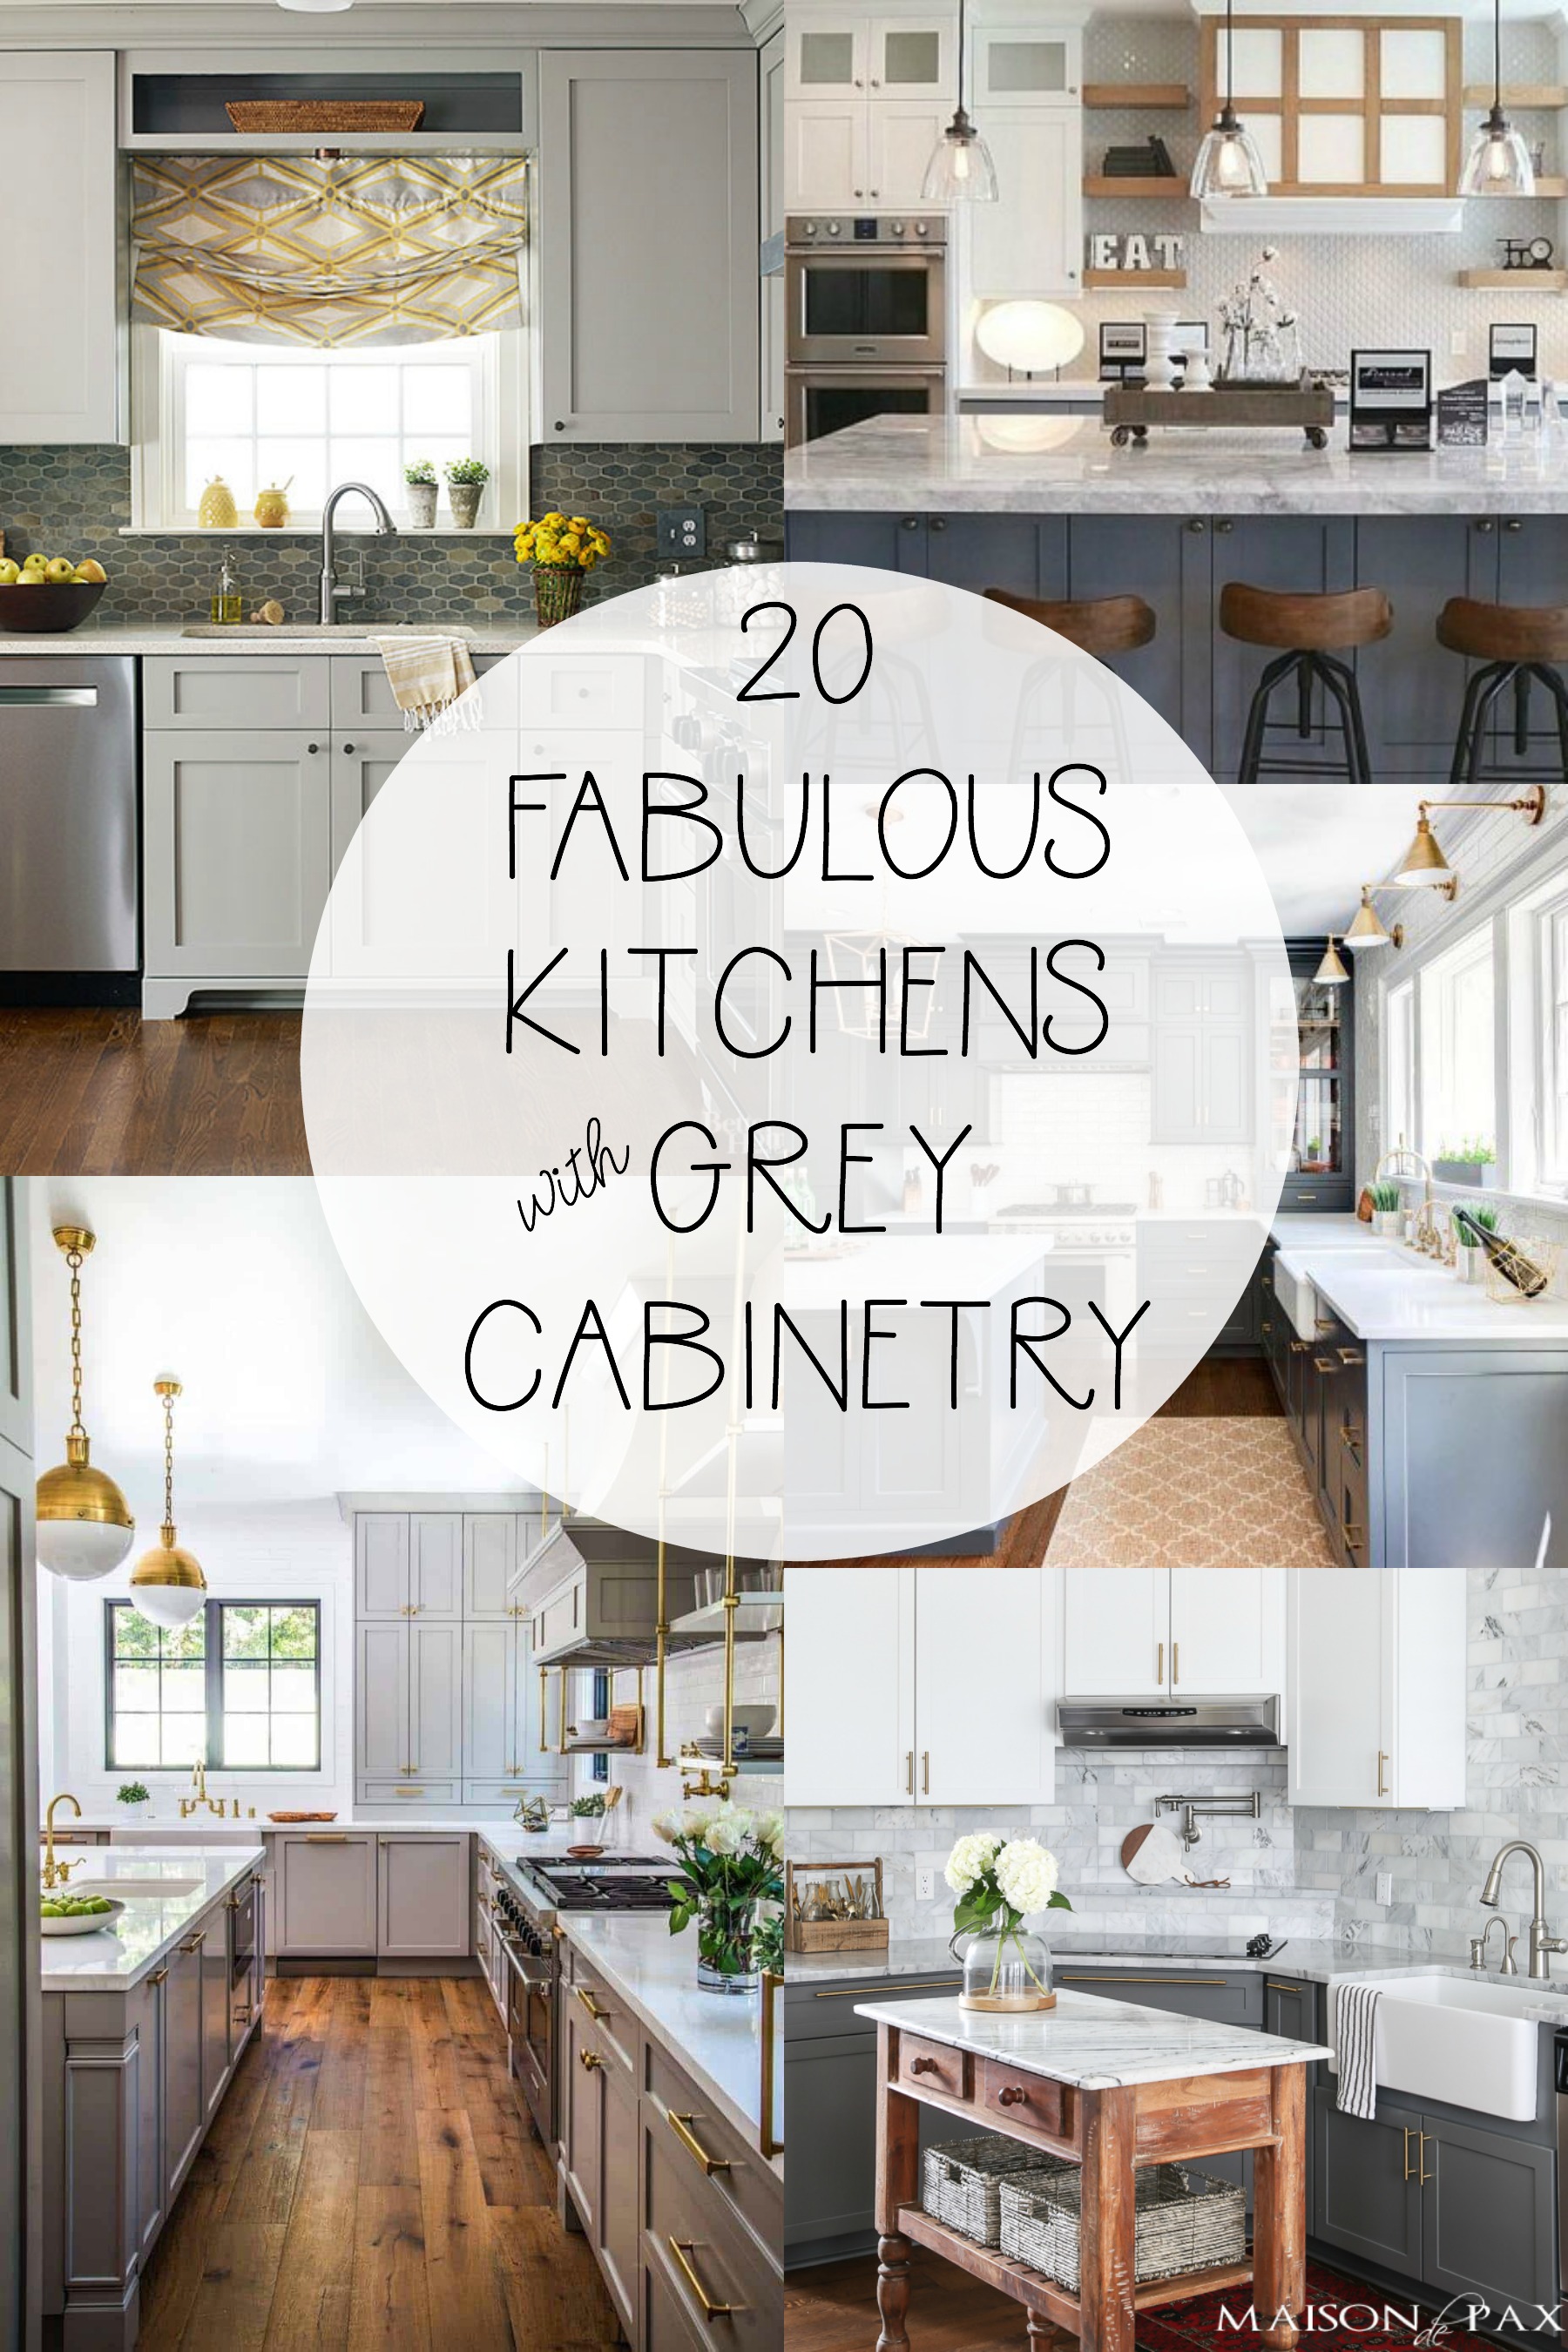 20 Ways to Style Gray Kitchen Cabinets